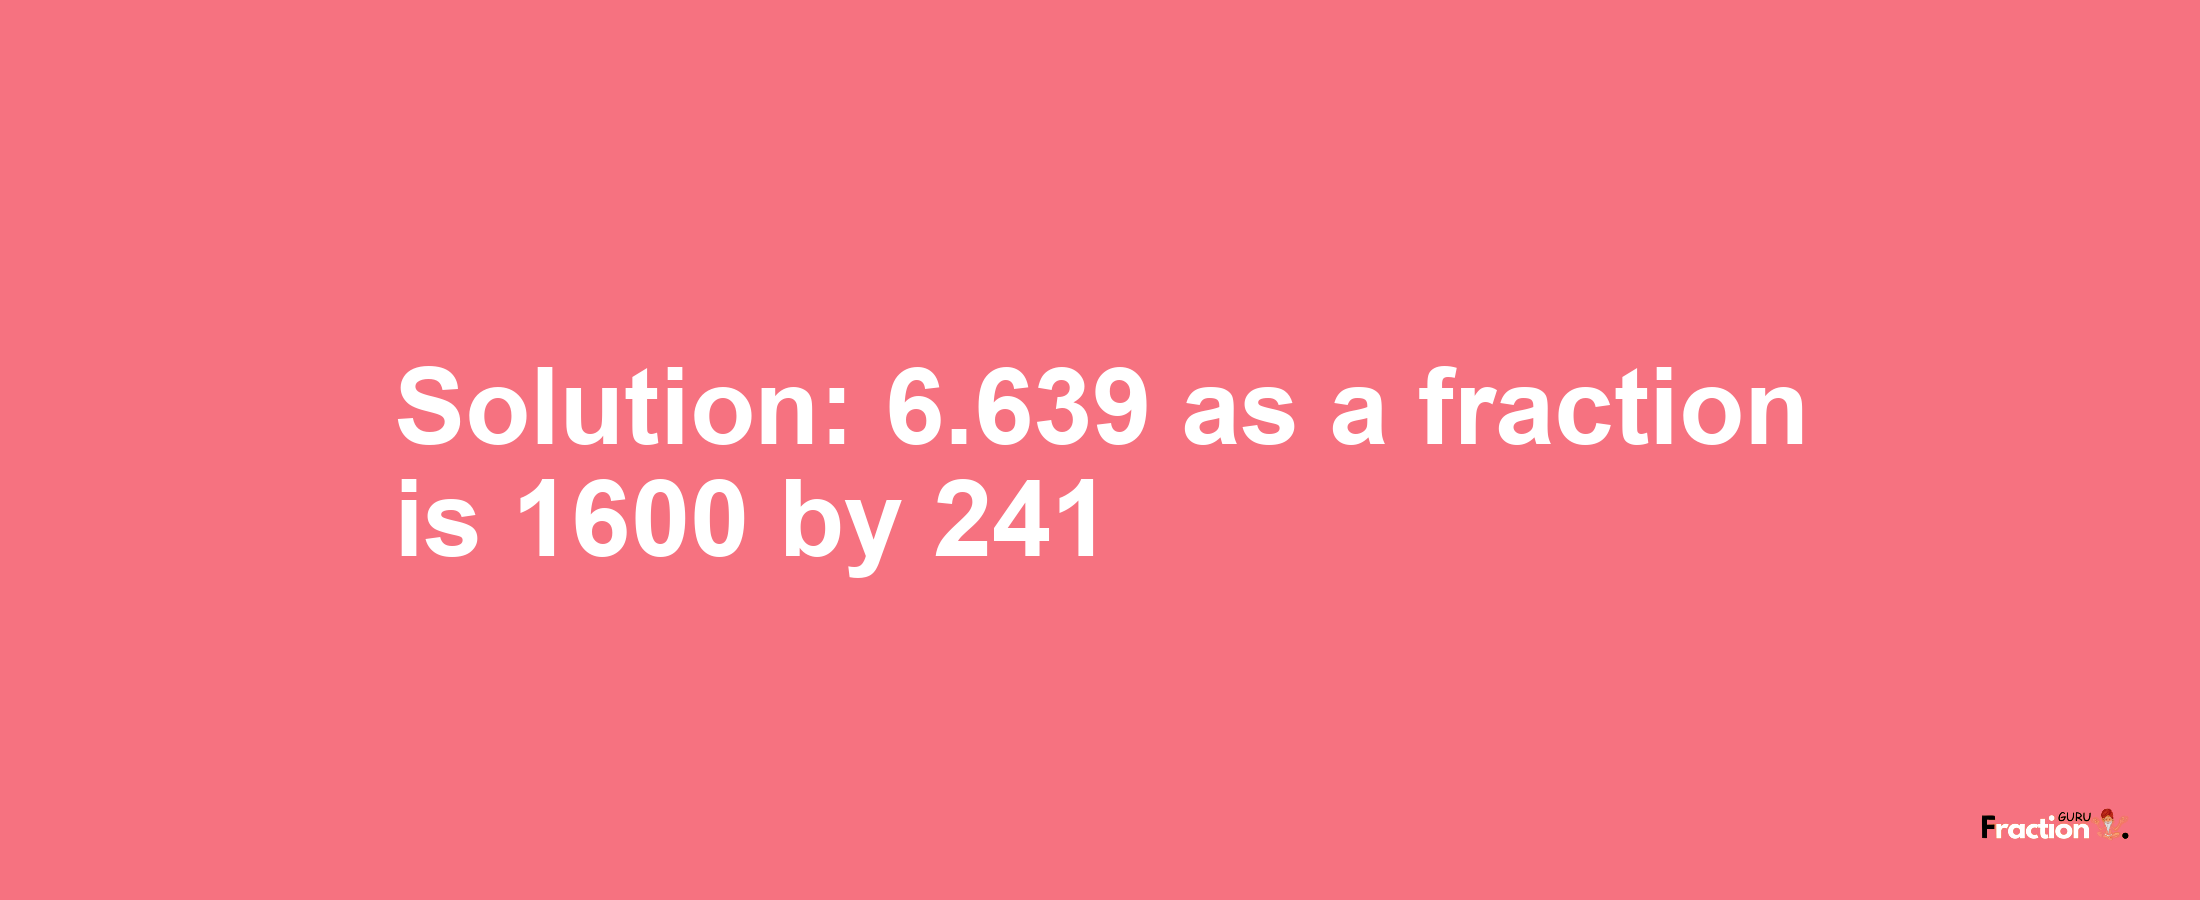 Solution:6.639 as a fraction is 1600/241